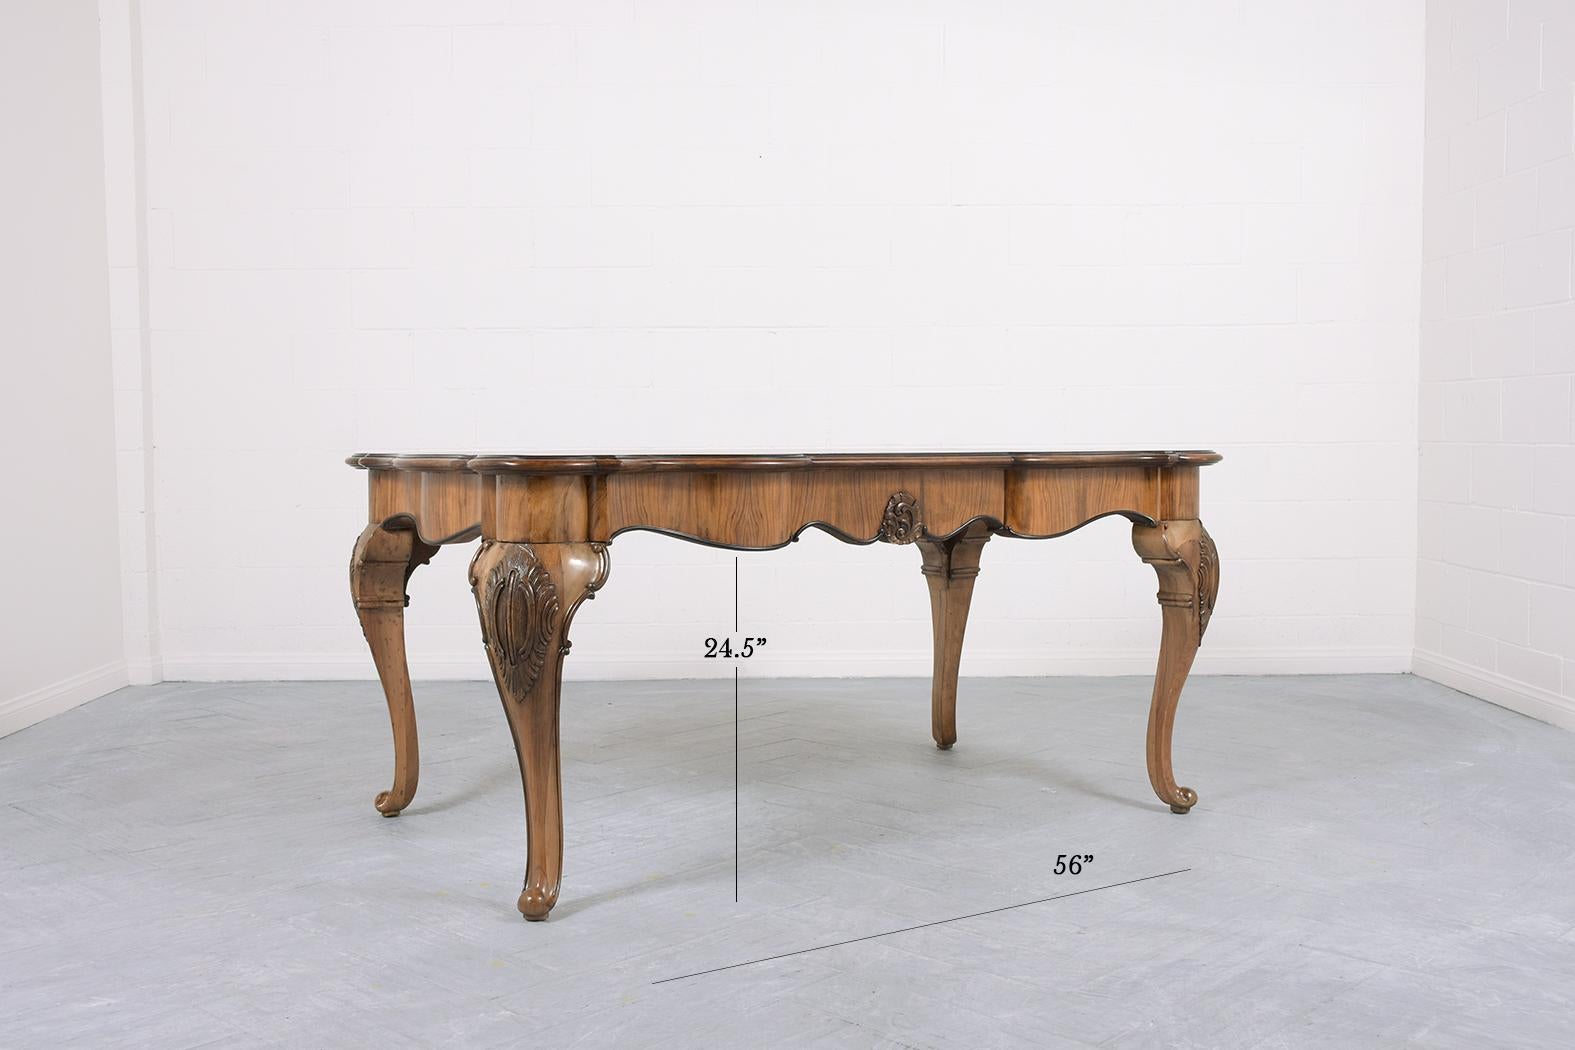 Late 19th-Century English Walnut Dining Table with Carved Cabriole Legs 1